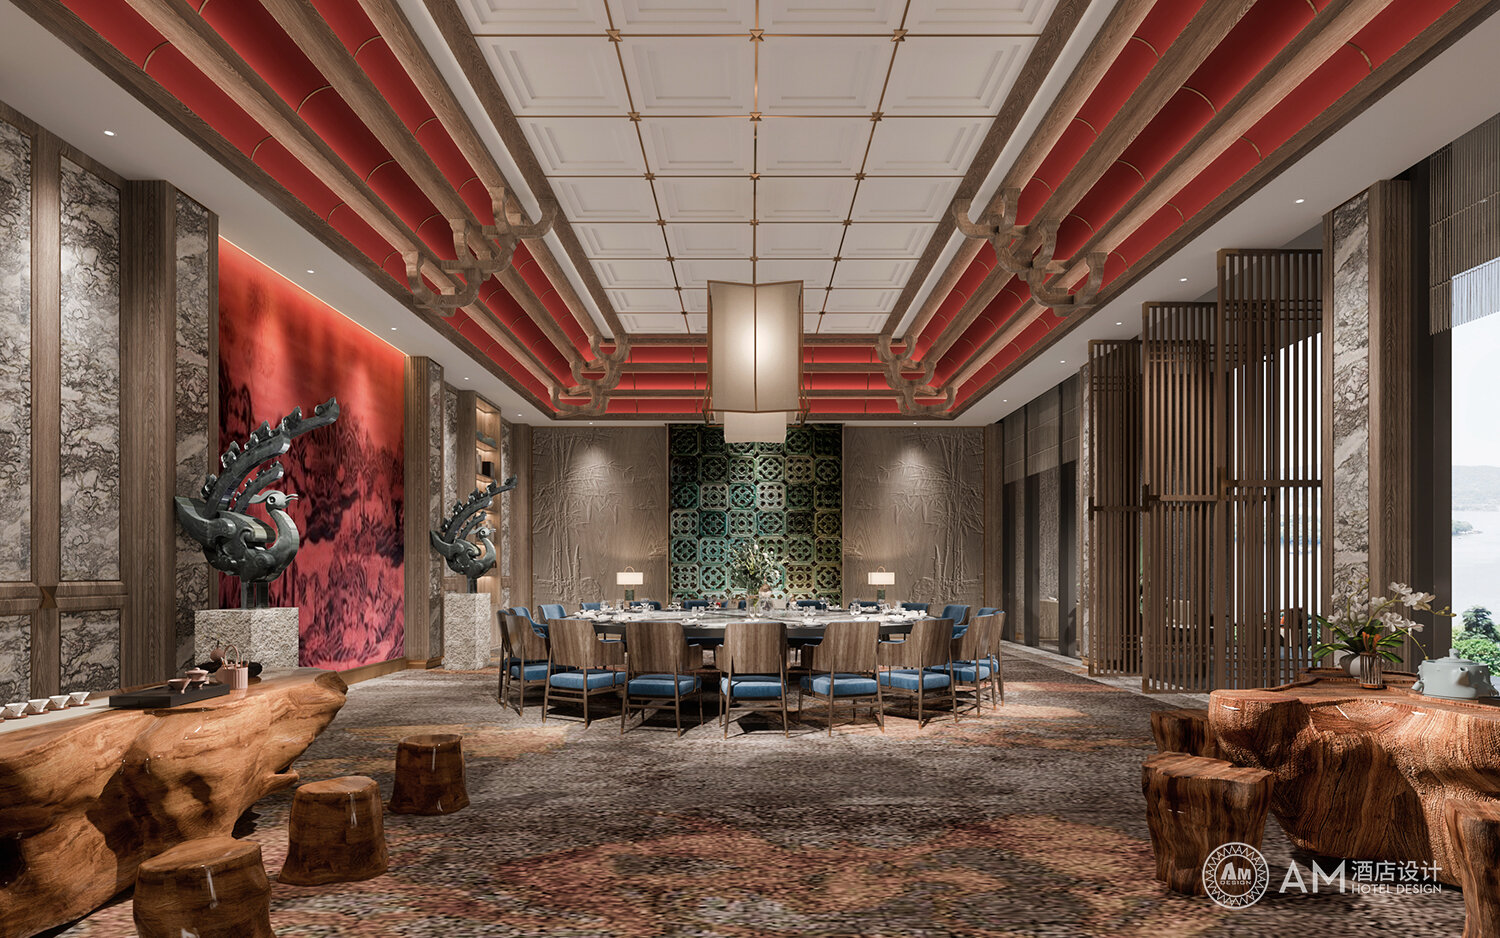 AM DESIGN | Private room design of South Lake Holiday Hotel in Hanzhong, Shaanxi